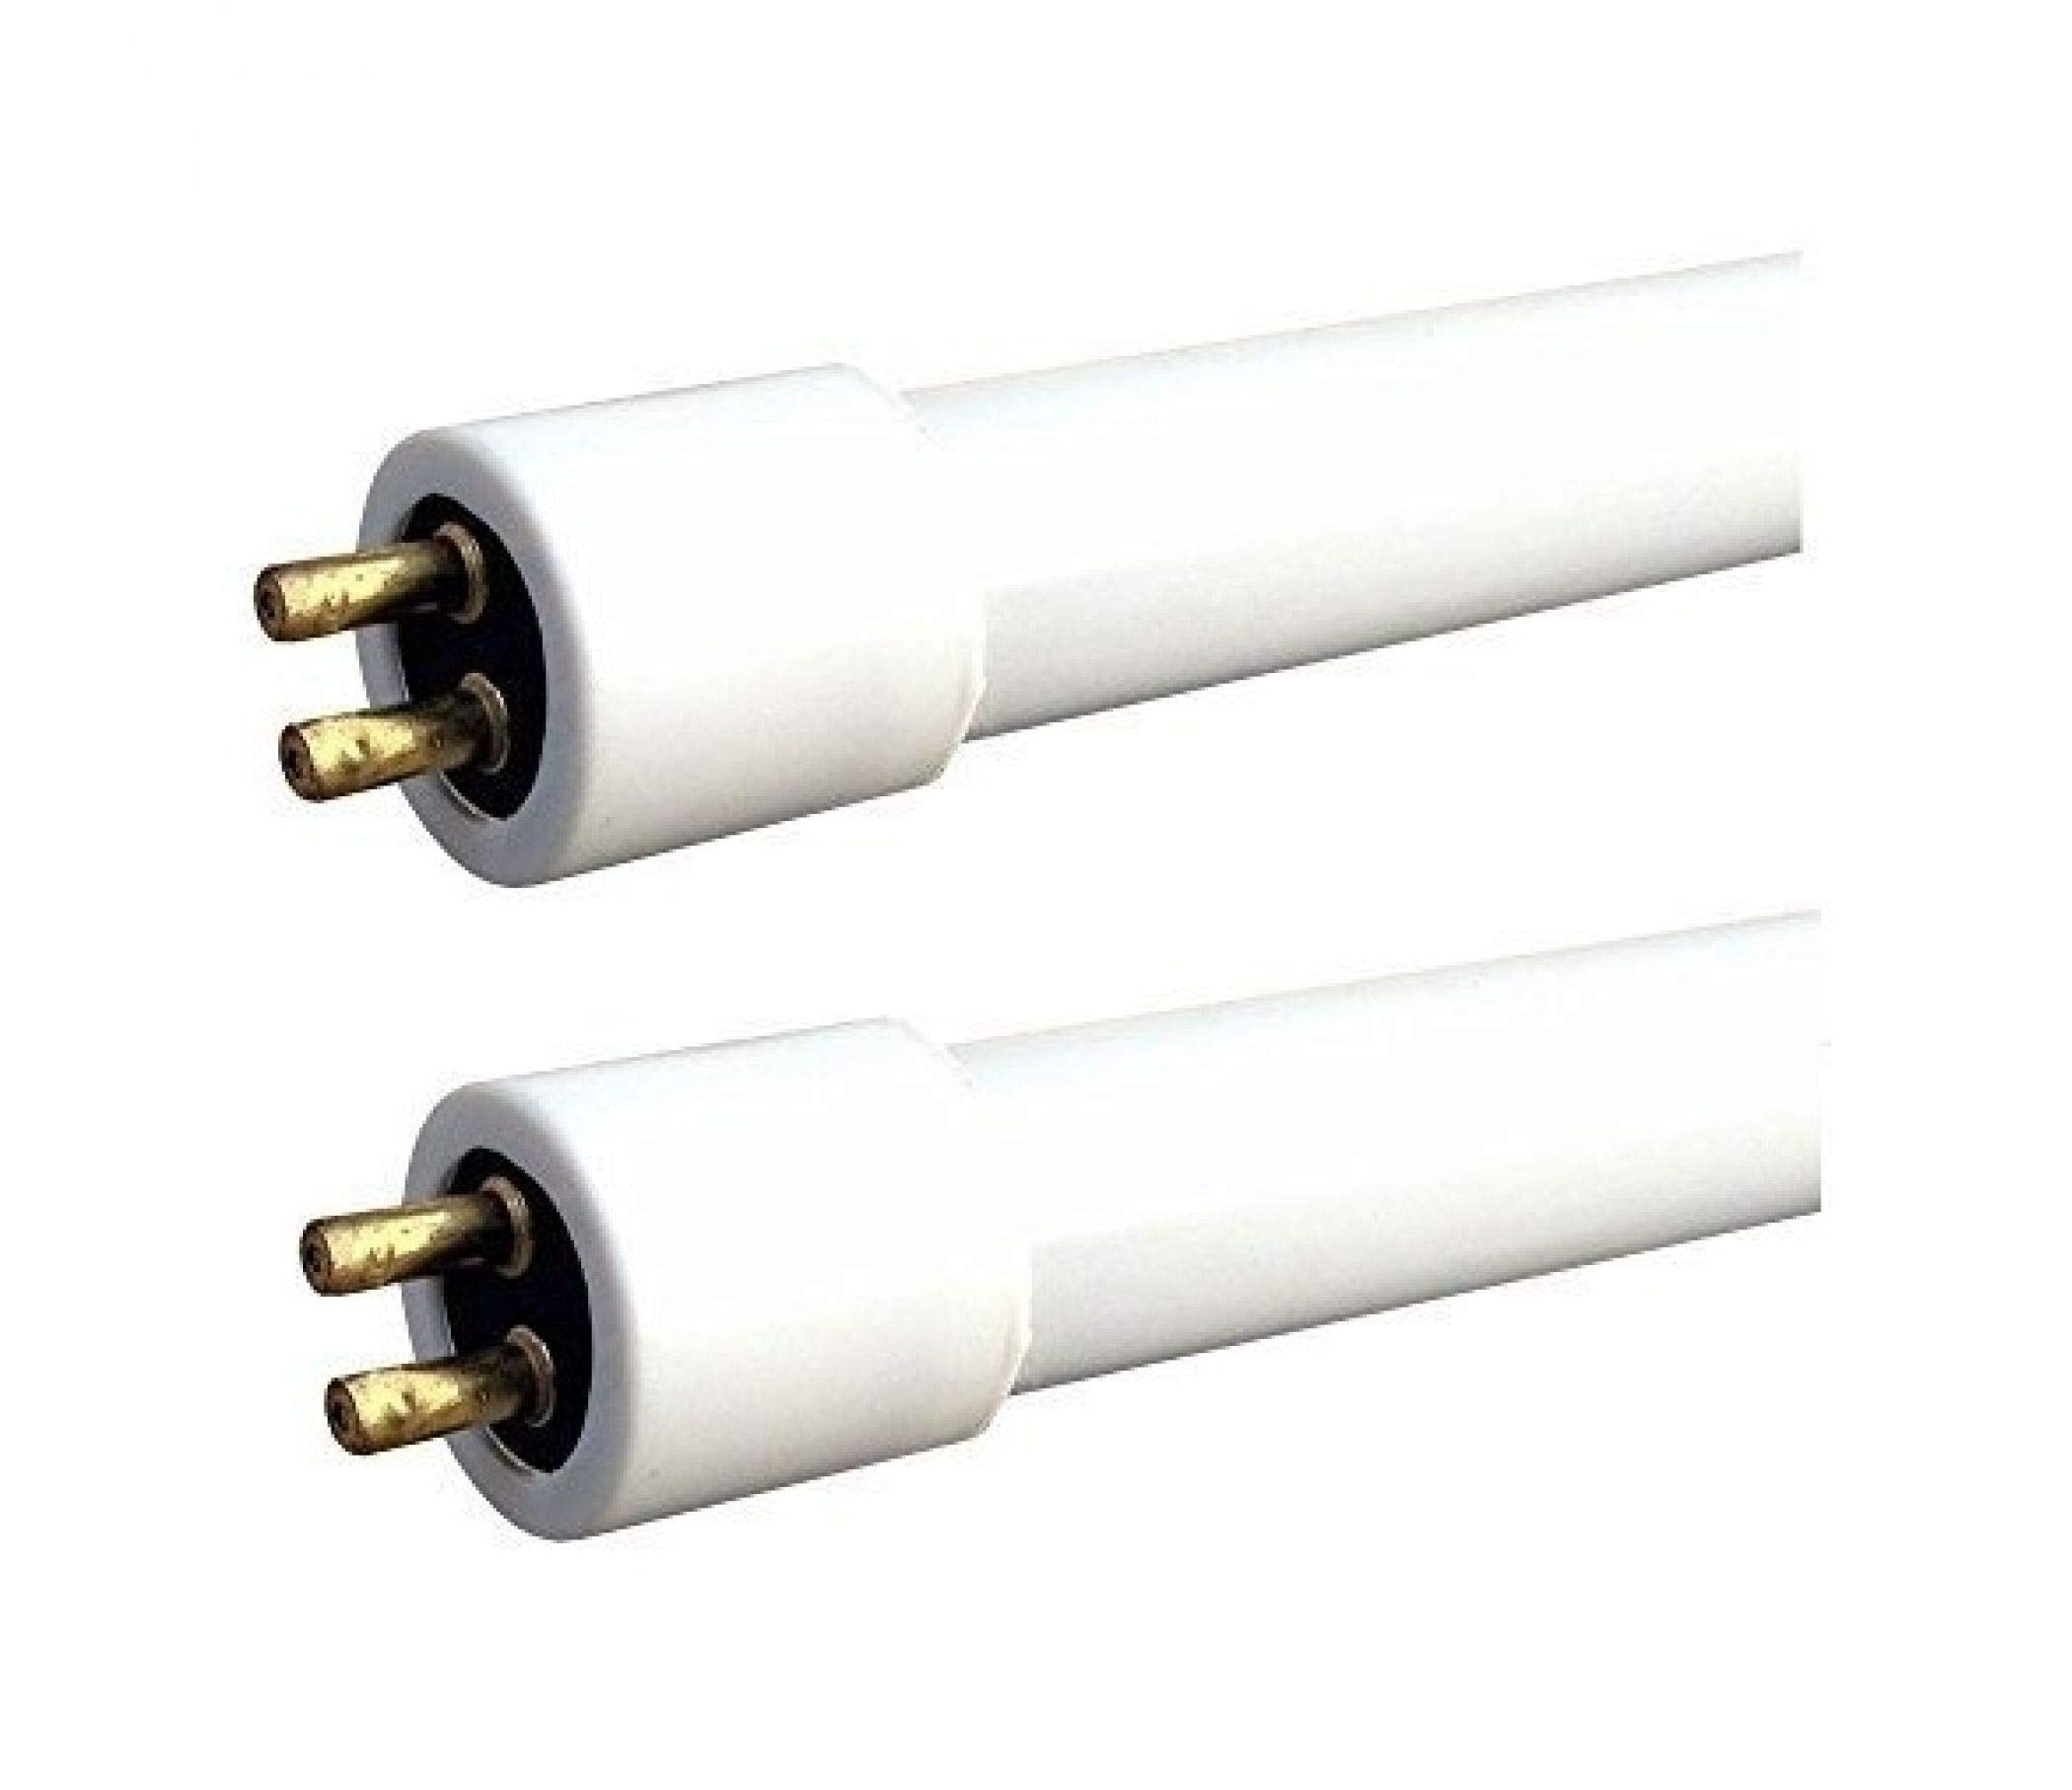 2 Pack 6w T4 Fluorescent Tube Warm White 232mm inc pins, 218mm excl pins Check Length Carefully